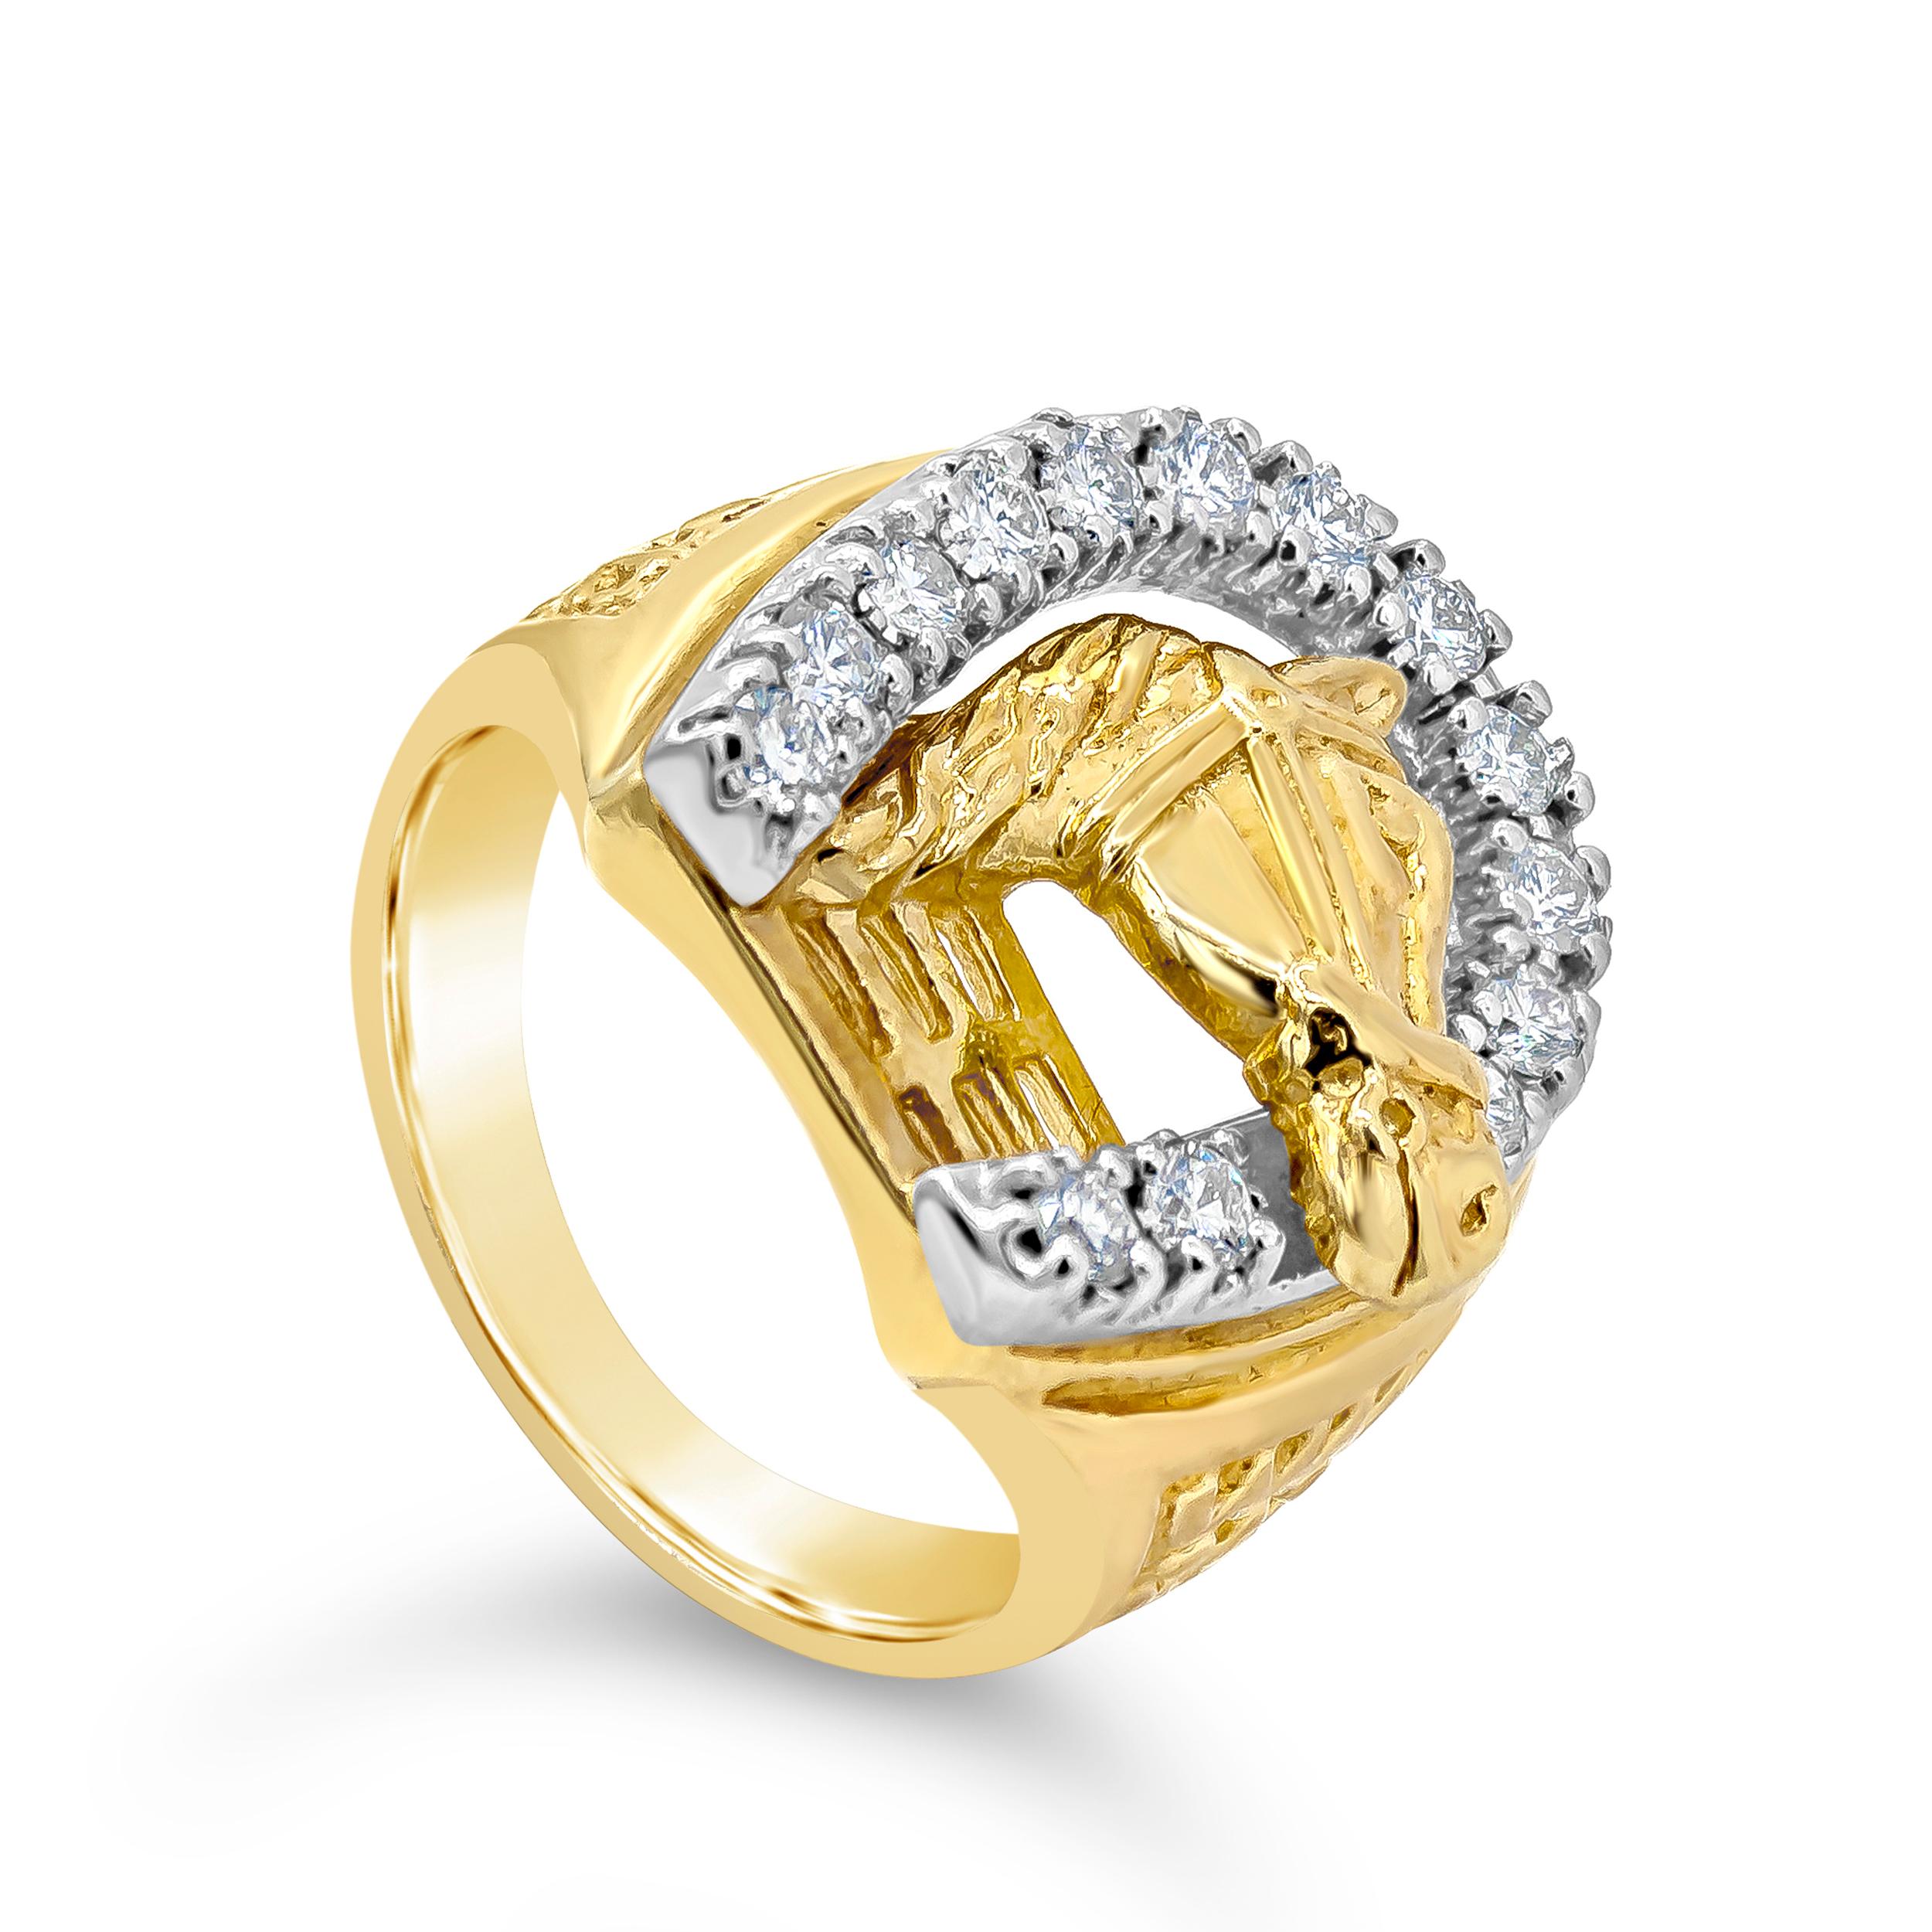 A fashionable men's ring perfect for people who love horses or horse racing. Showcases a detailed horse figure, accented by a diamond encrusted horse shoe. Diamonds weigh 0.70 carats total. Set in thick 14K yellow gold. Size 9.25 US resizable upon